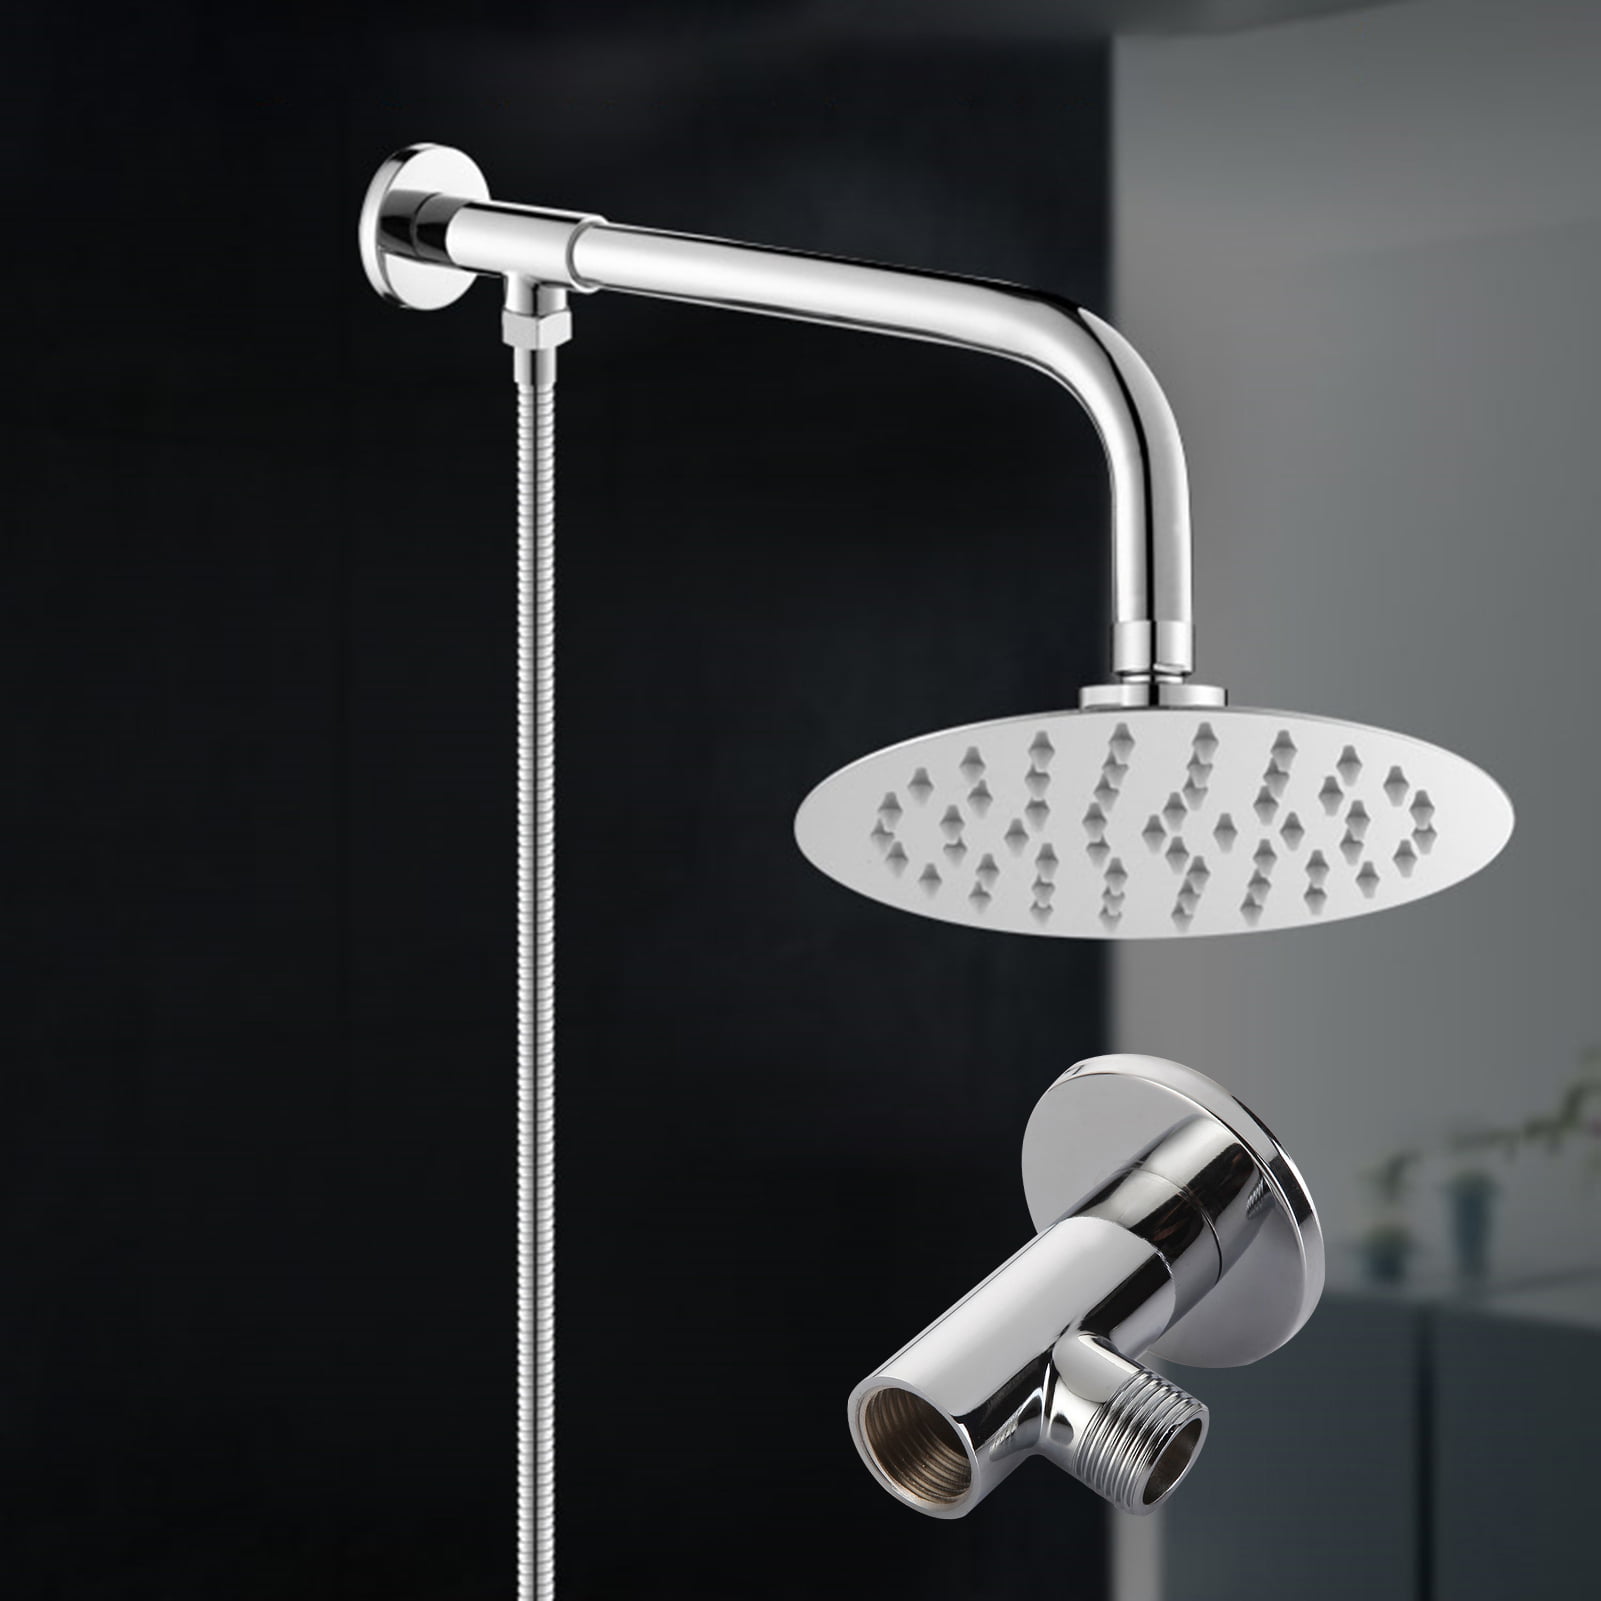 Stainless Steel Shower Head Accessories，Mount Base Extension Pipe Arm Bathroom Accessories Walmart.com